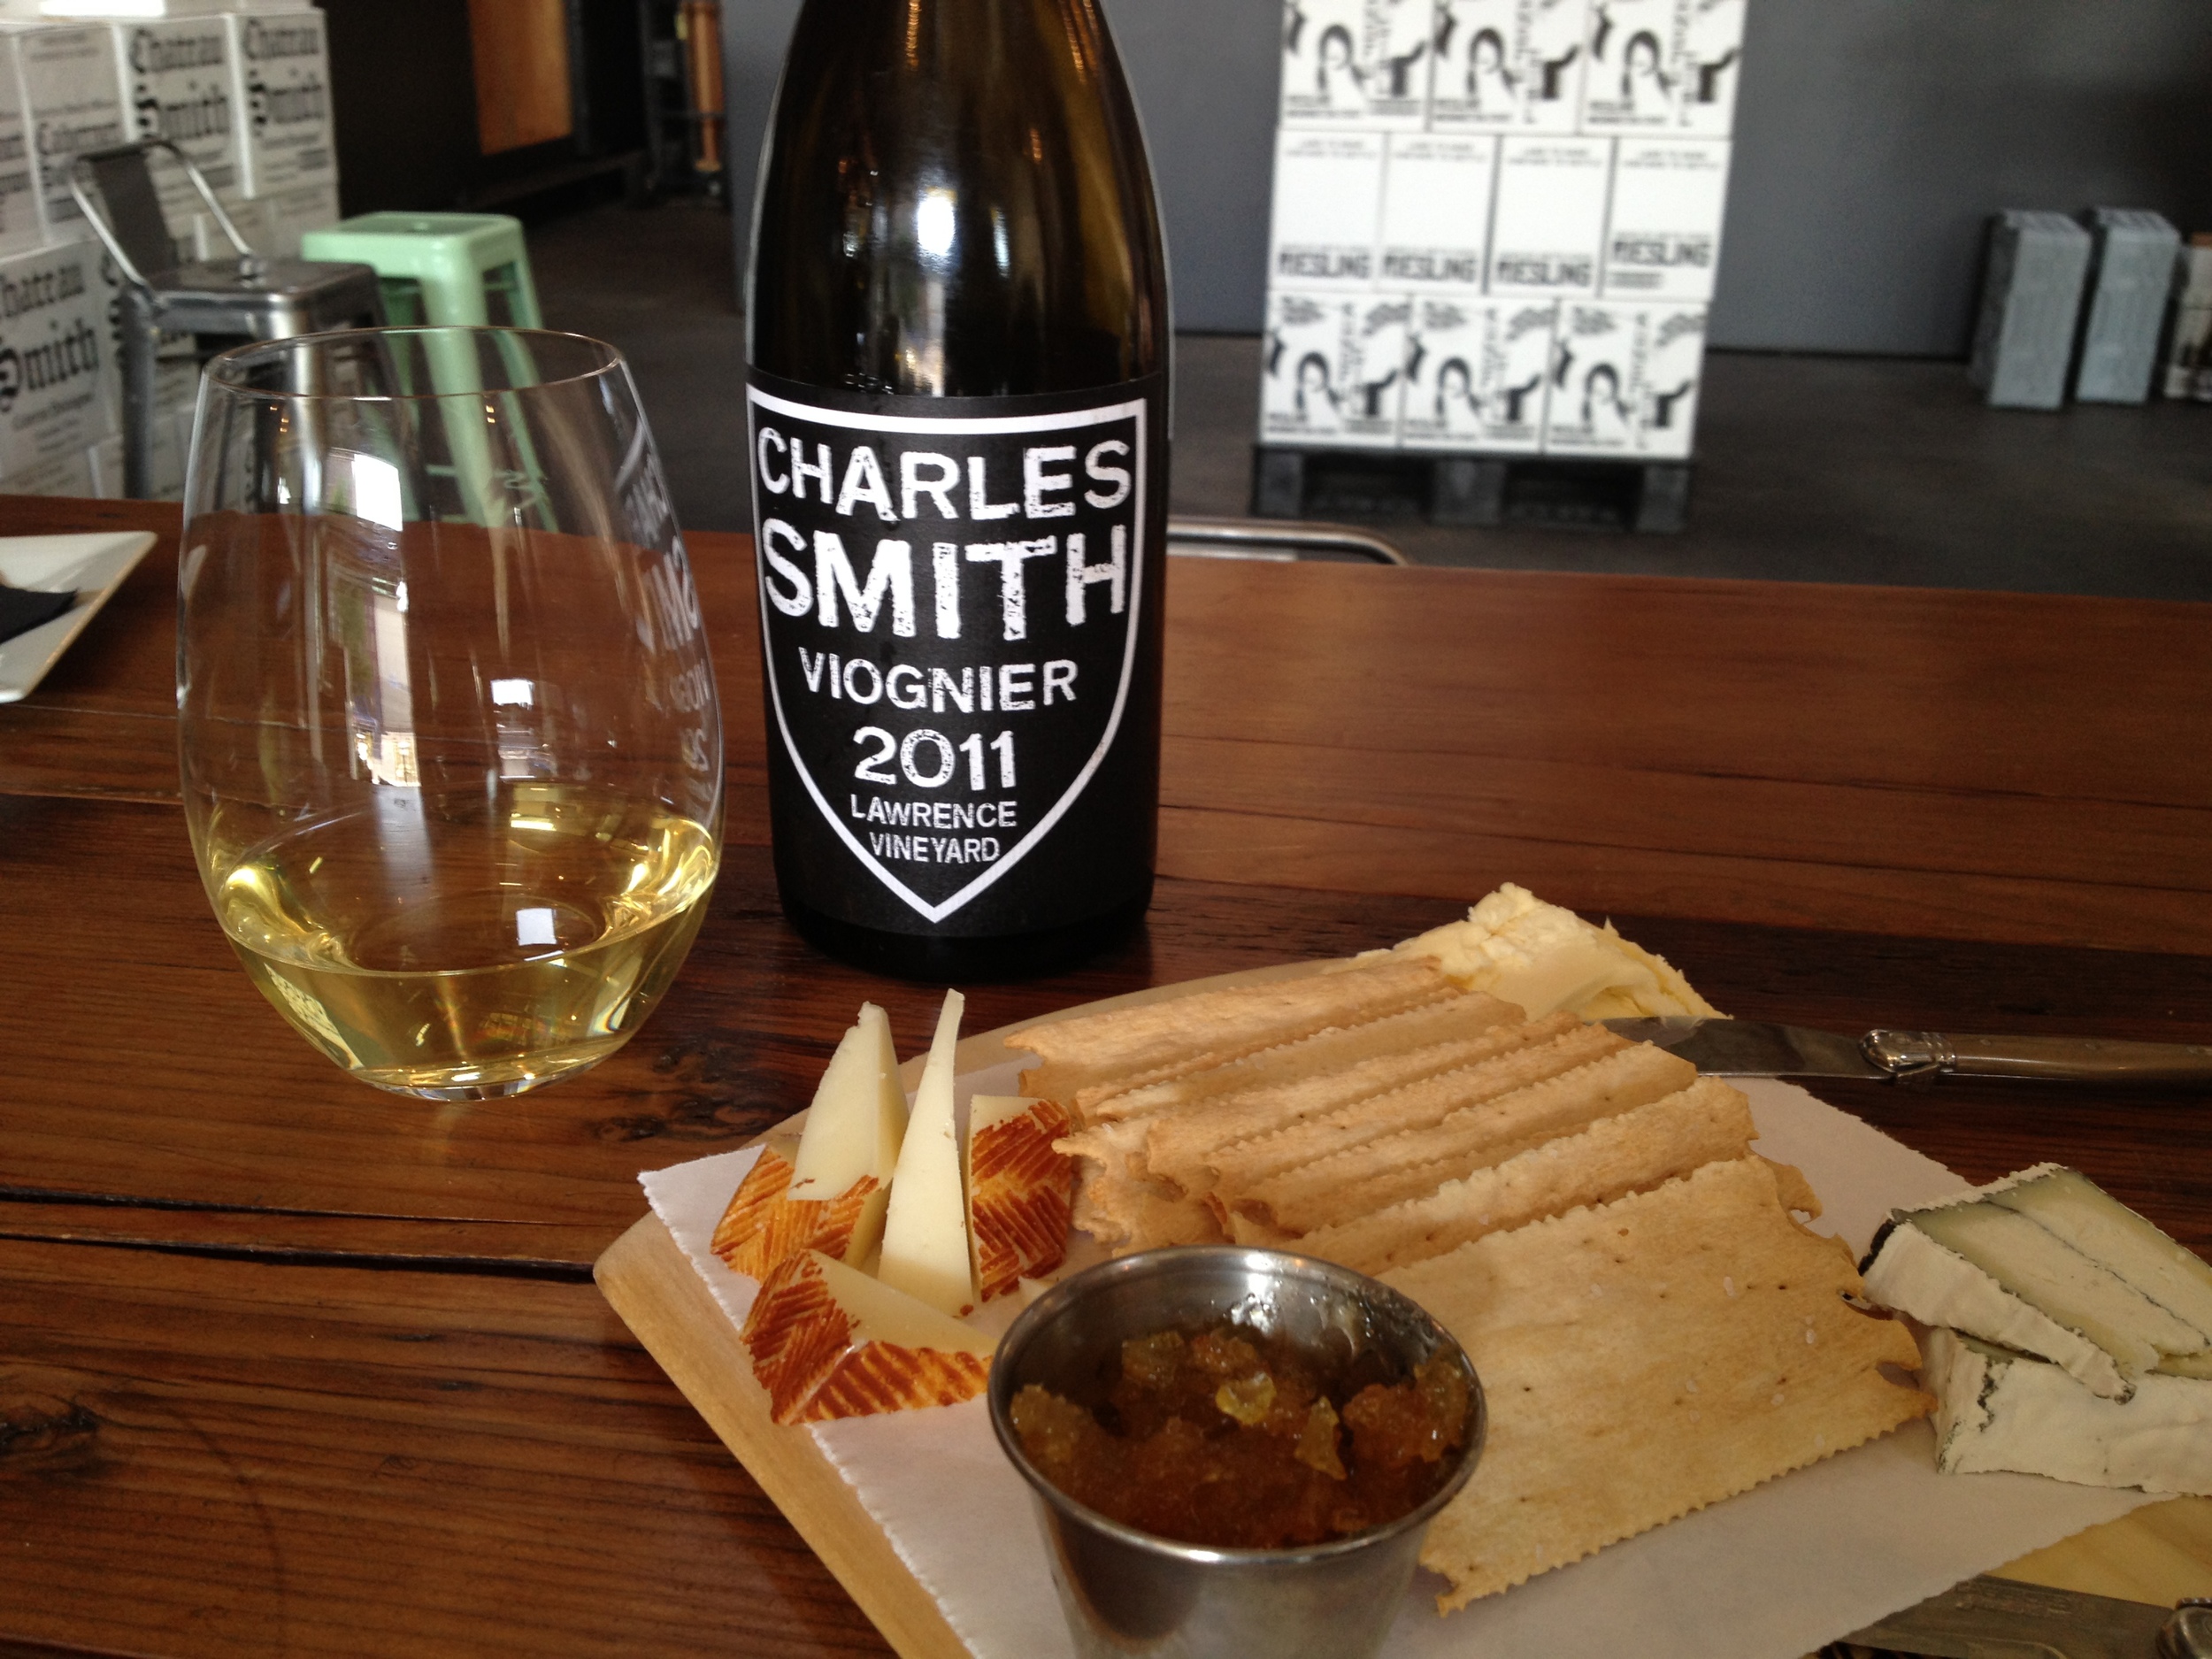  Near-Condrieu-like awesomeness in this WA Viognier. Great cheese partner.  